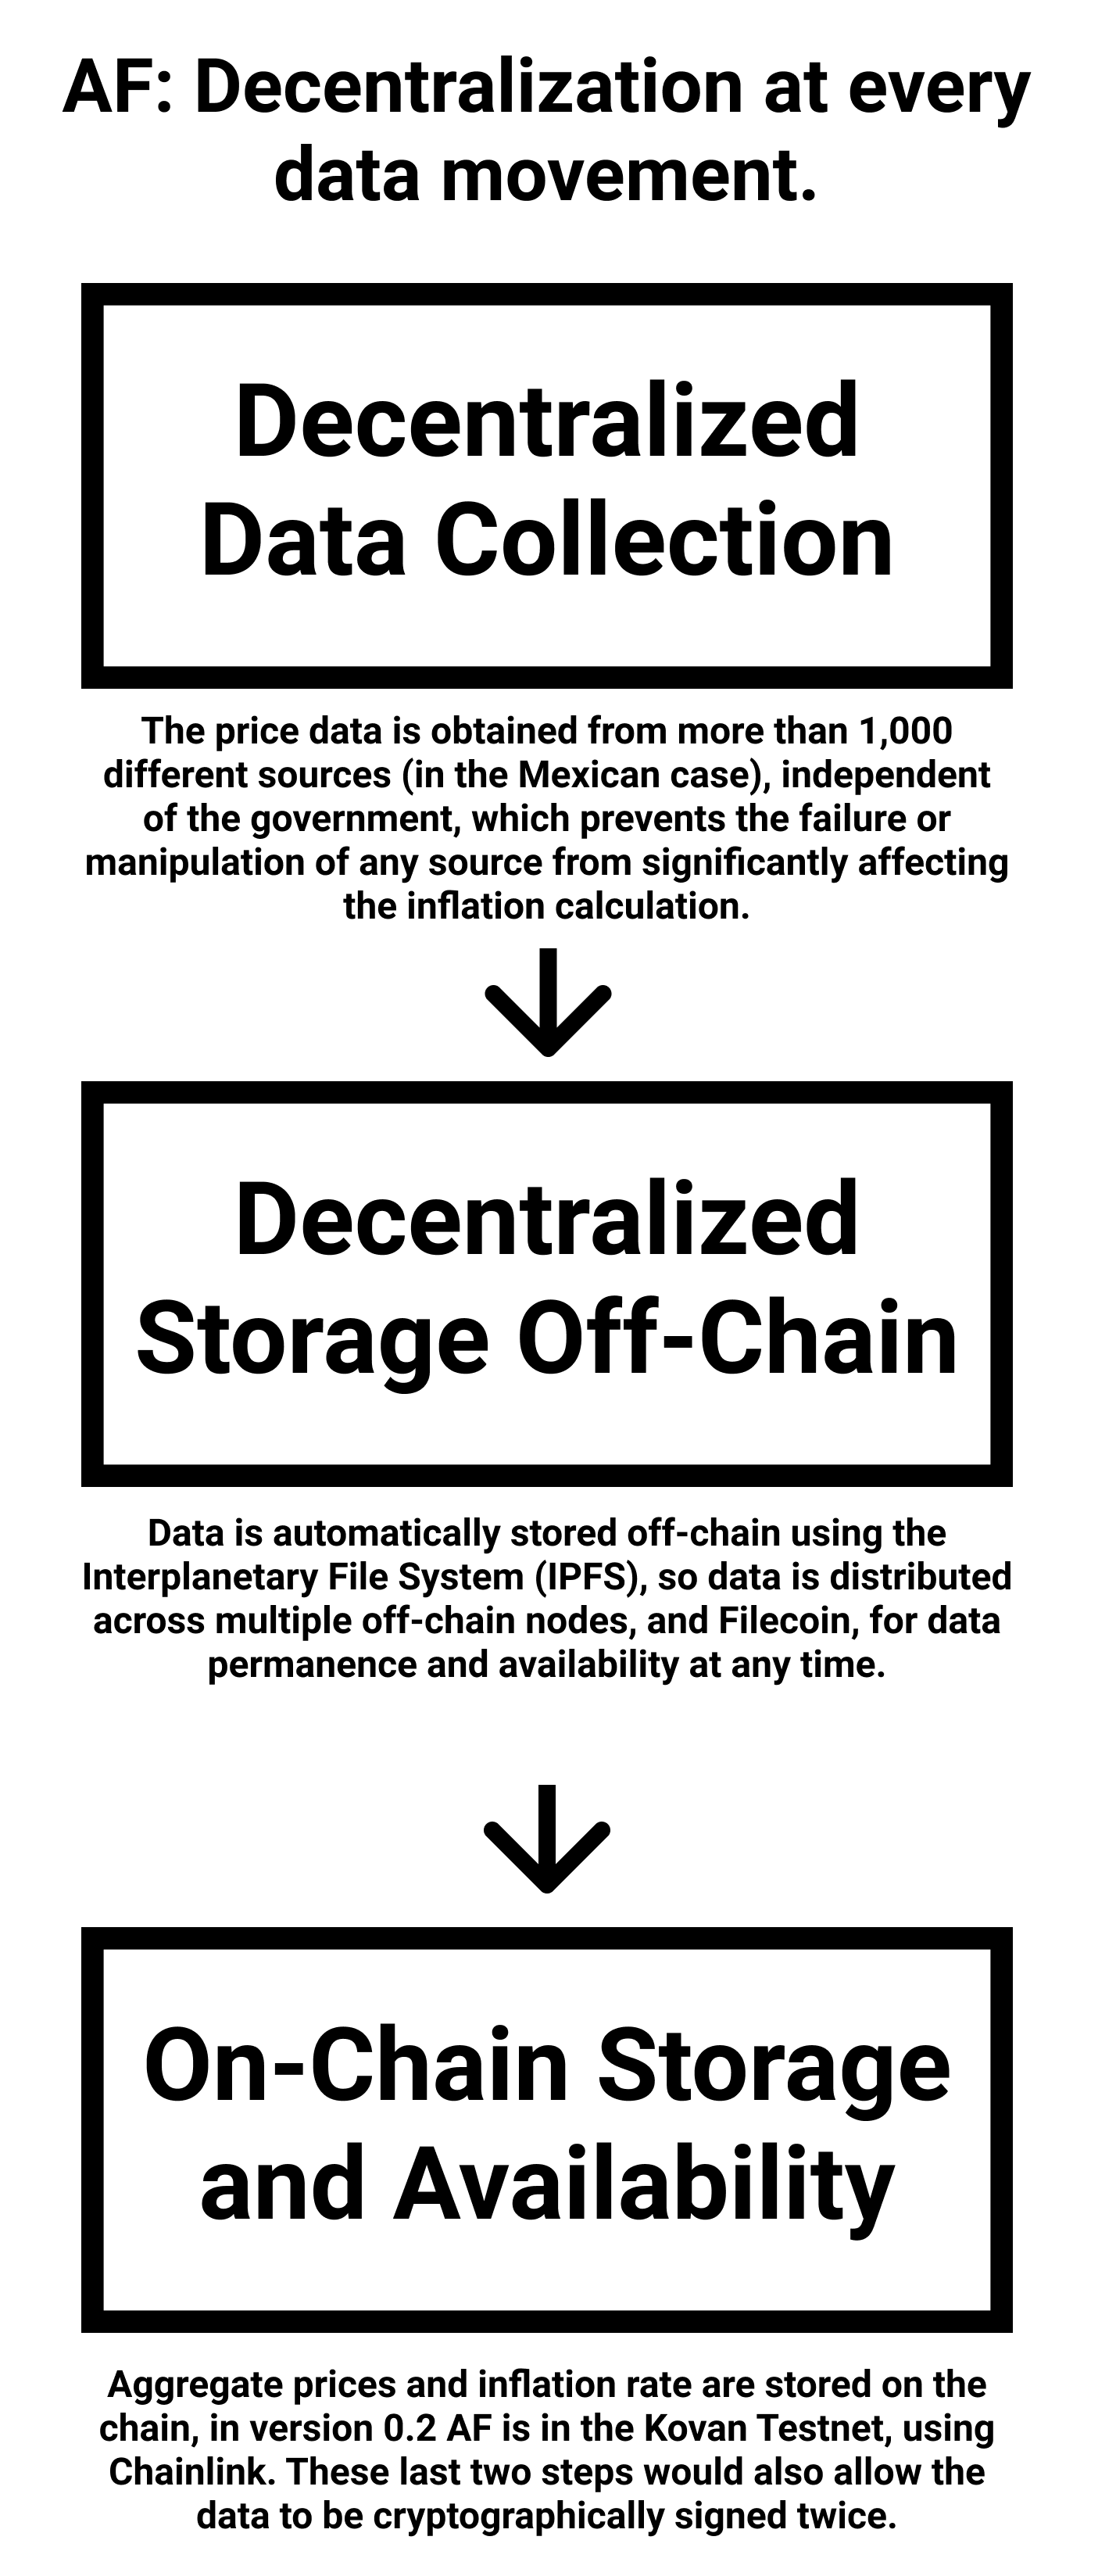 Decentralization at three stages.